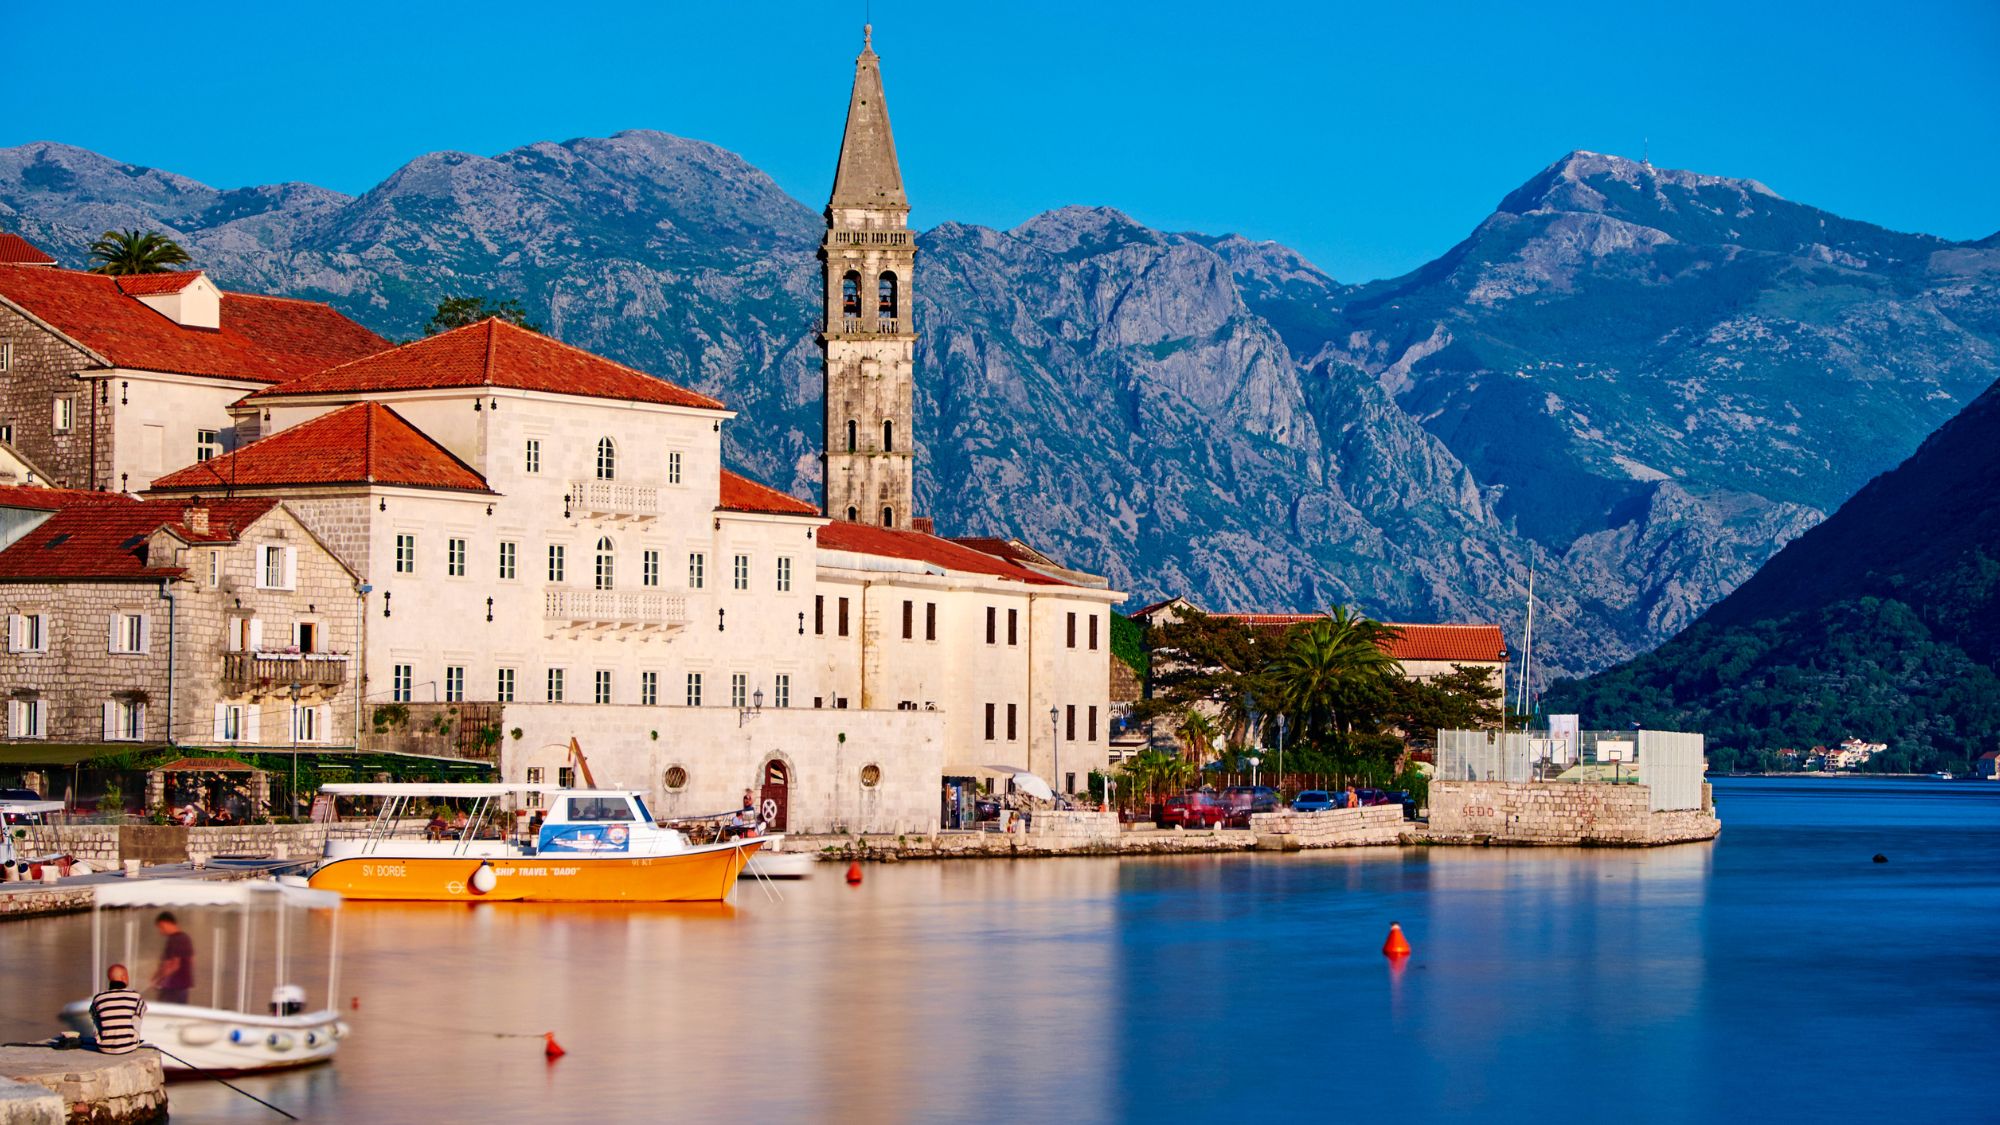  The beaches and mountains of Montenegro 